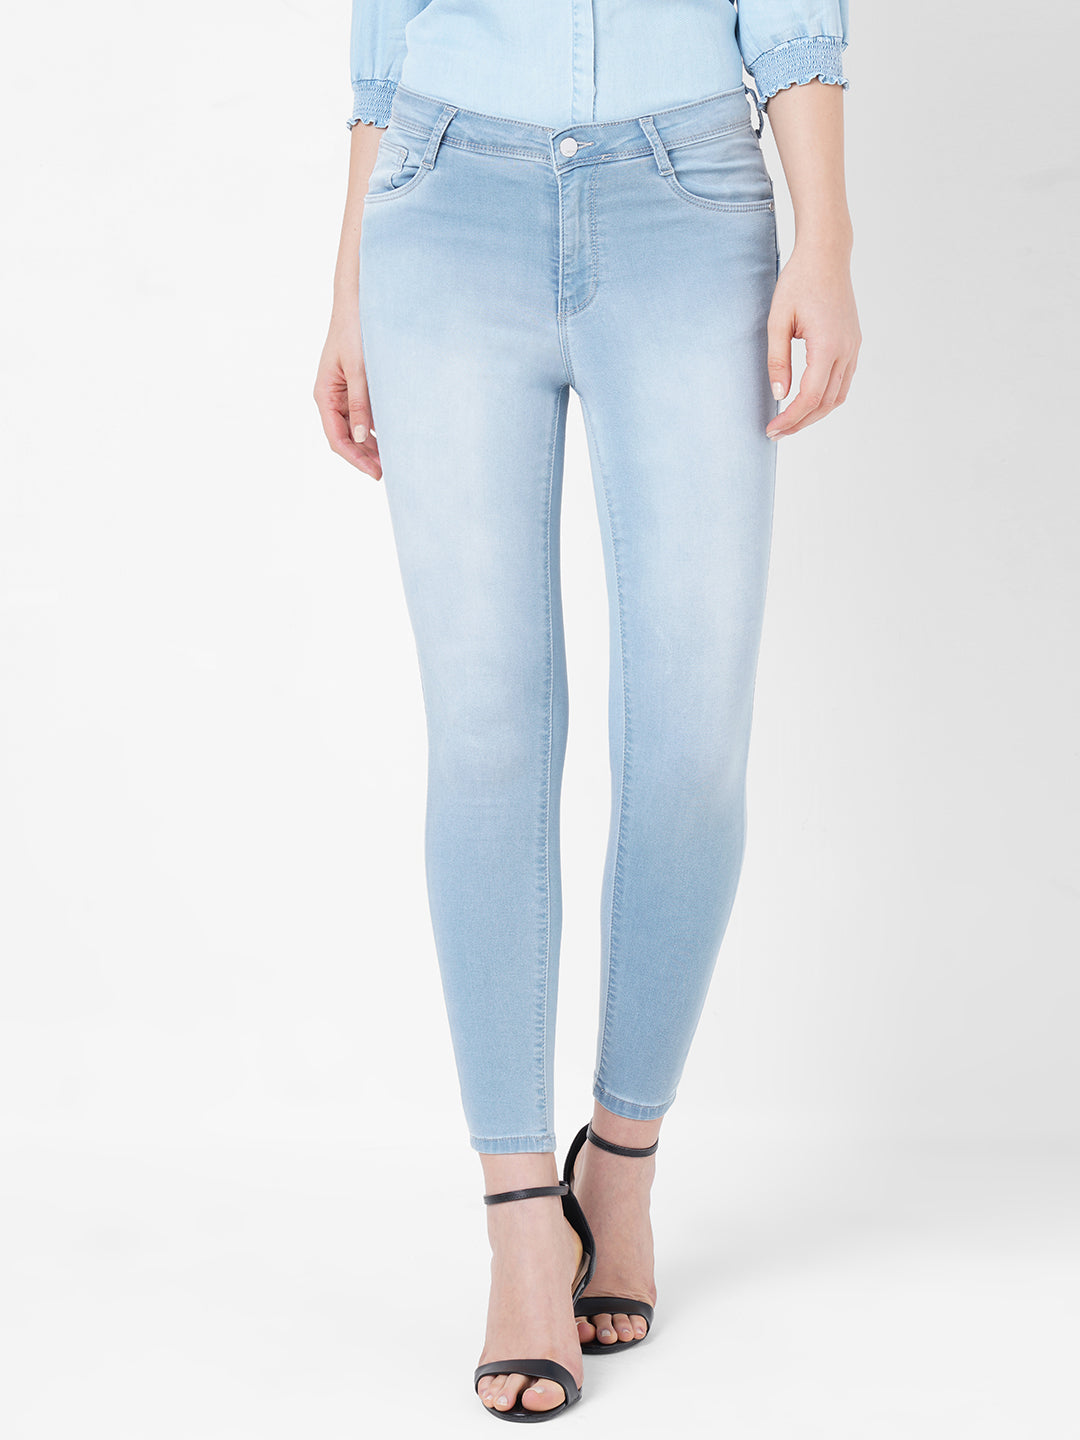 Buy Mid Rise Jeans For Women Online, Mid Waist Jeans